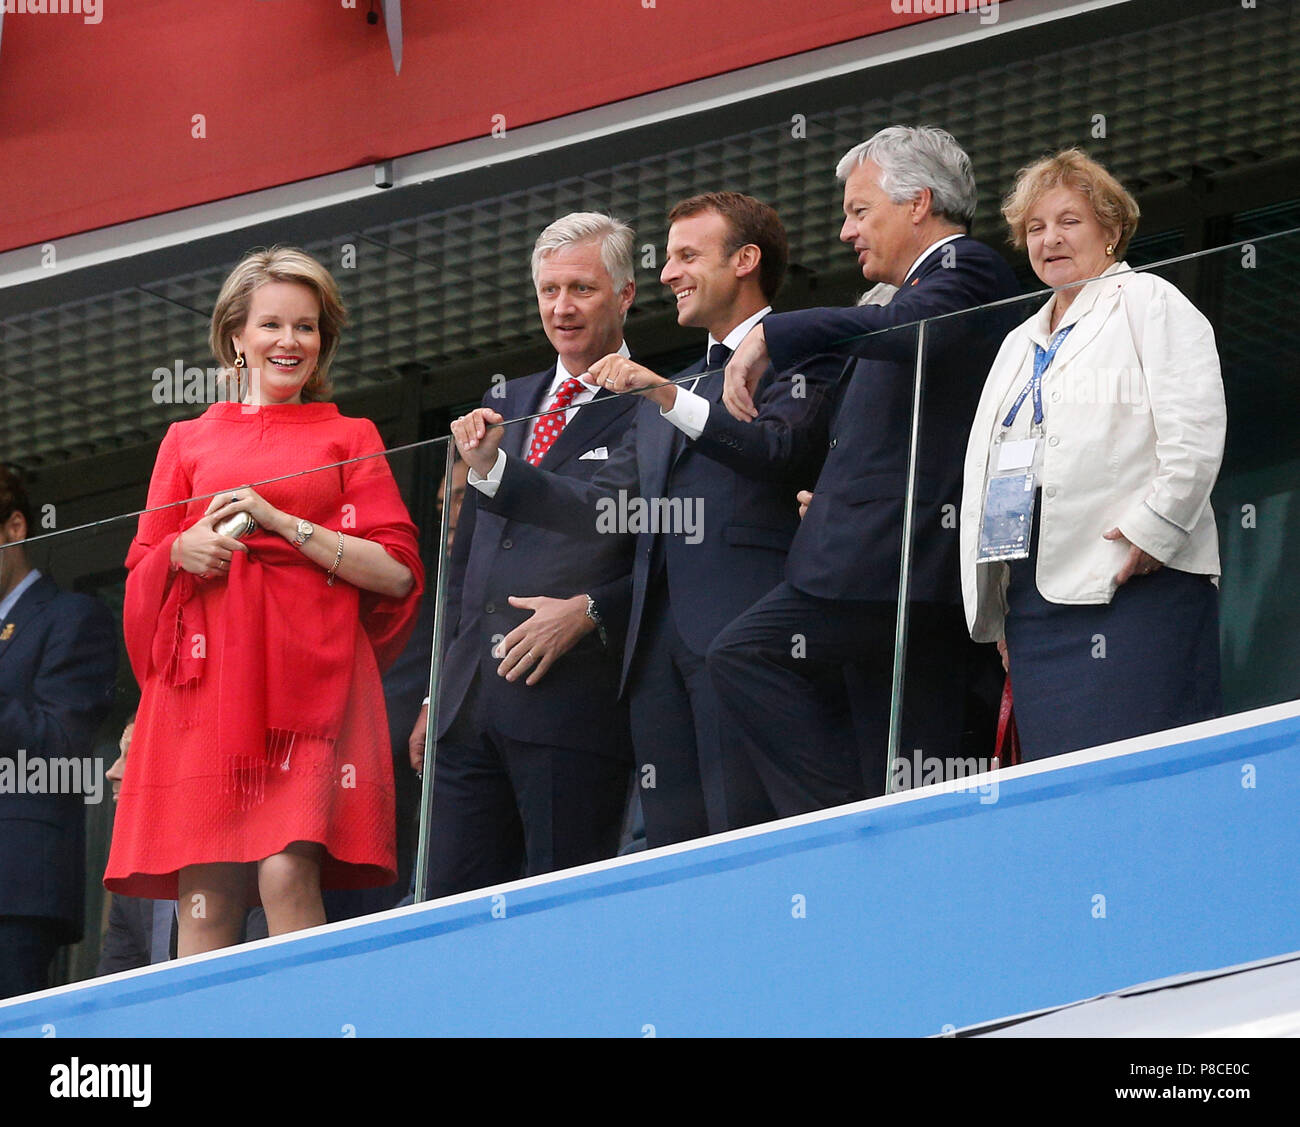 St Petersburg, Russia. 10th July, 2018. Emmanuel Macron (President of France, centre) with Queen Mathilde of Belgium (left), Philippe of Belgium (2nd left) and David Hill of the FA (2nd right) during the 2018 FIFA World Cup Semi Final match between France and Belgium at Saint Petersburg Stadium on July 10th 2018 in Saint Petersburg, Russia. (Photo by Daniel Chesterton/phcimages.com) Credit: PHC Images/Alamy Live News Stock Photo